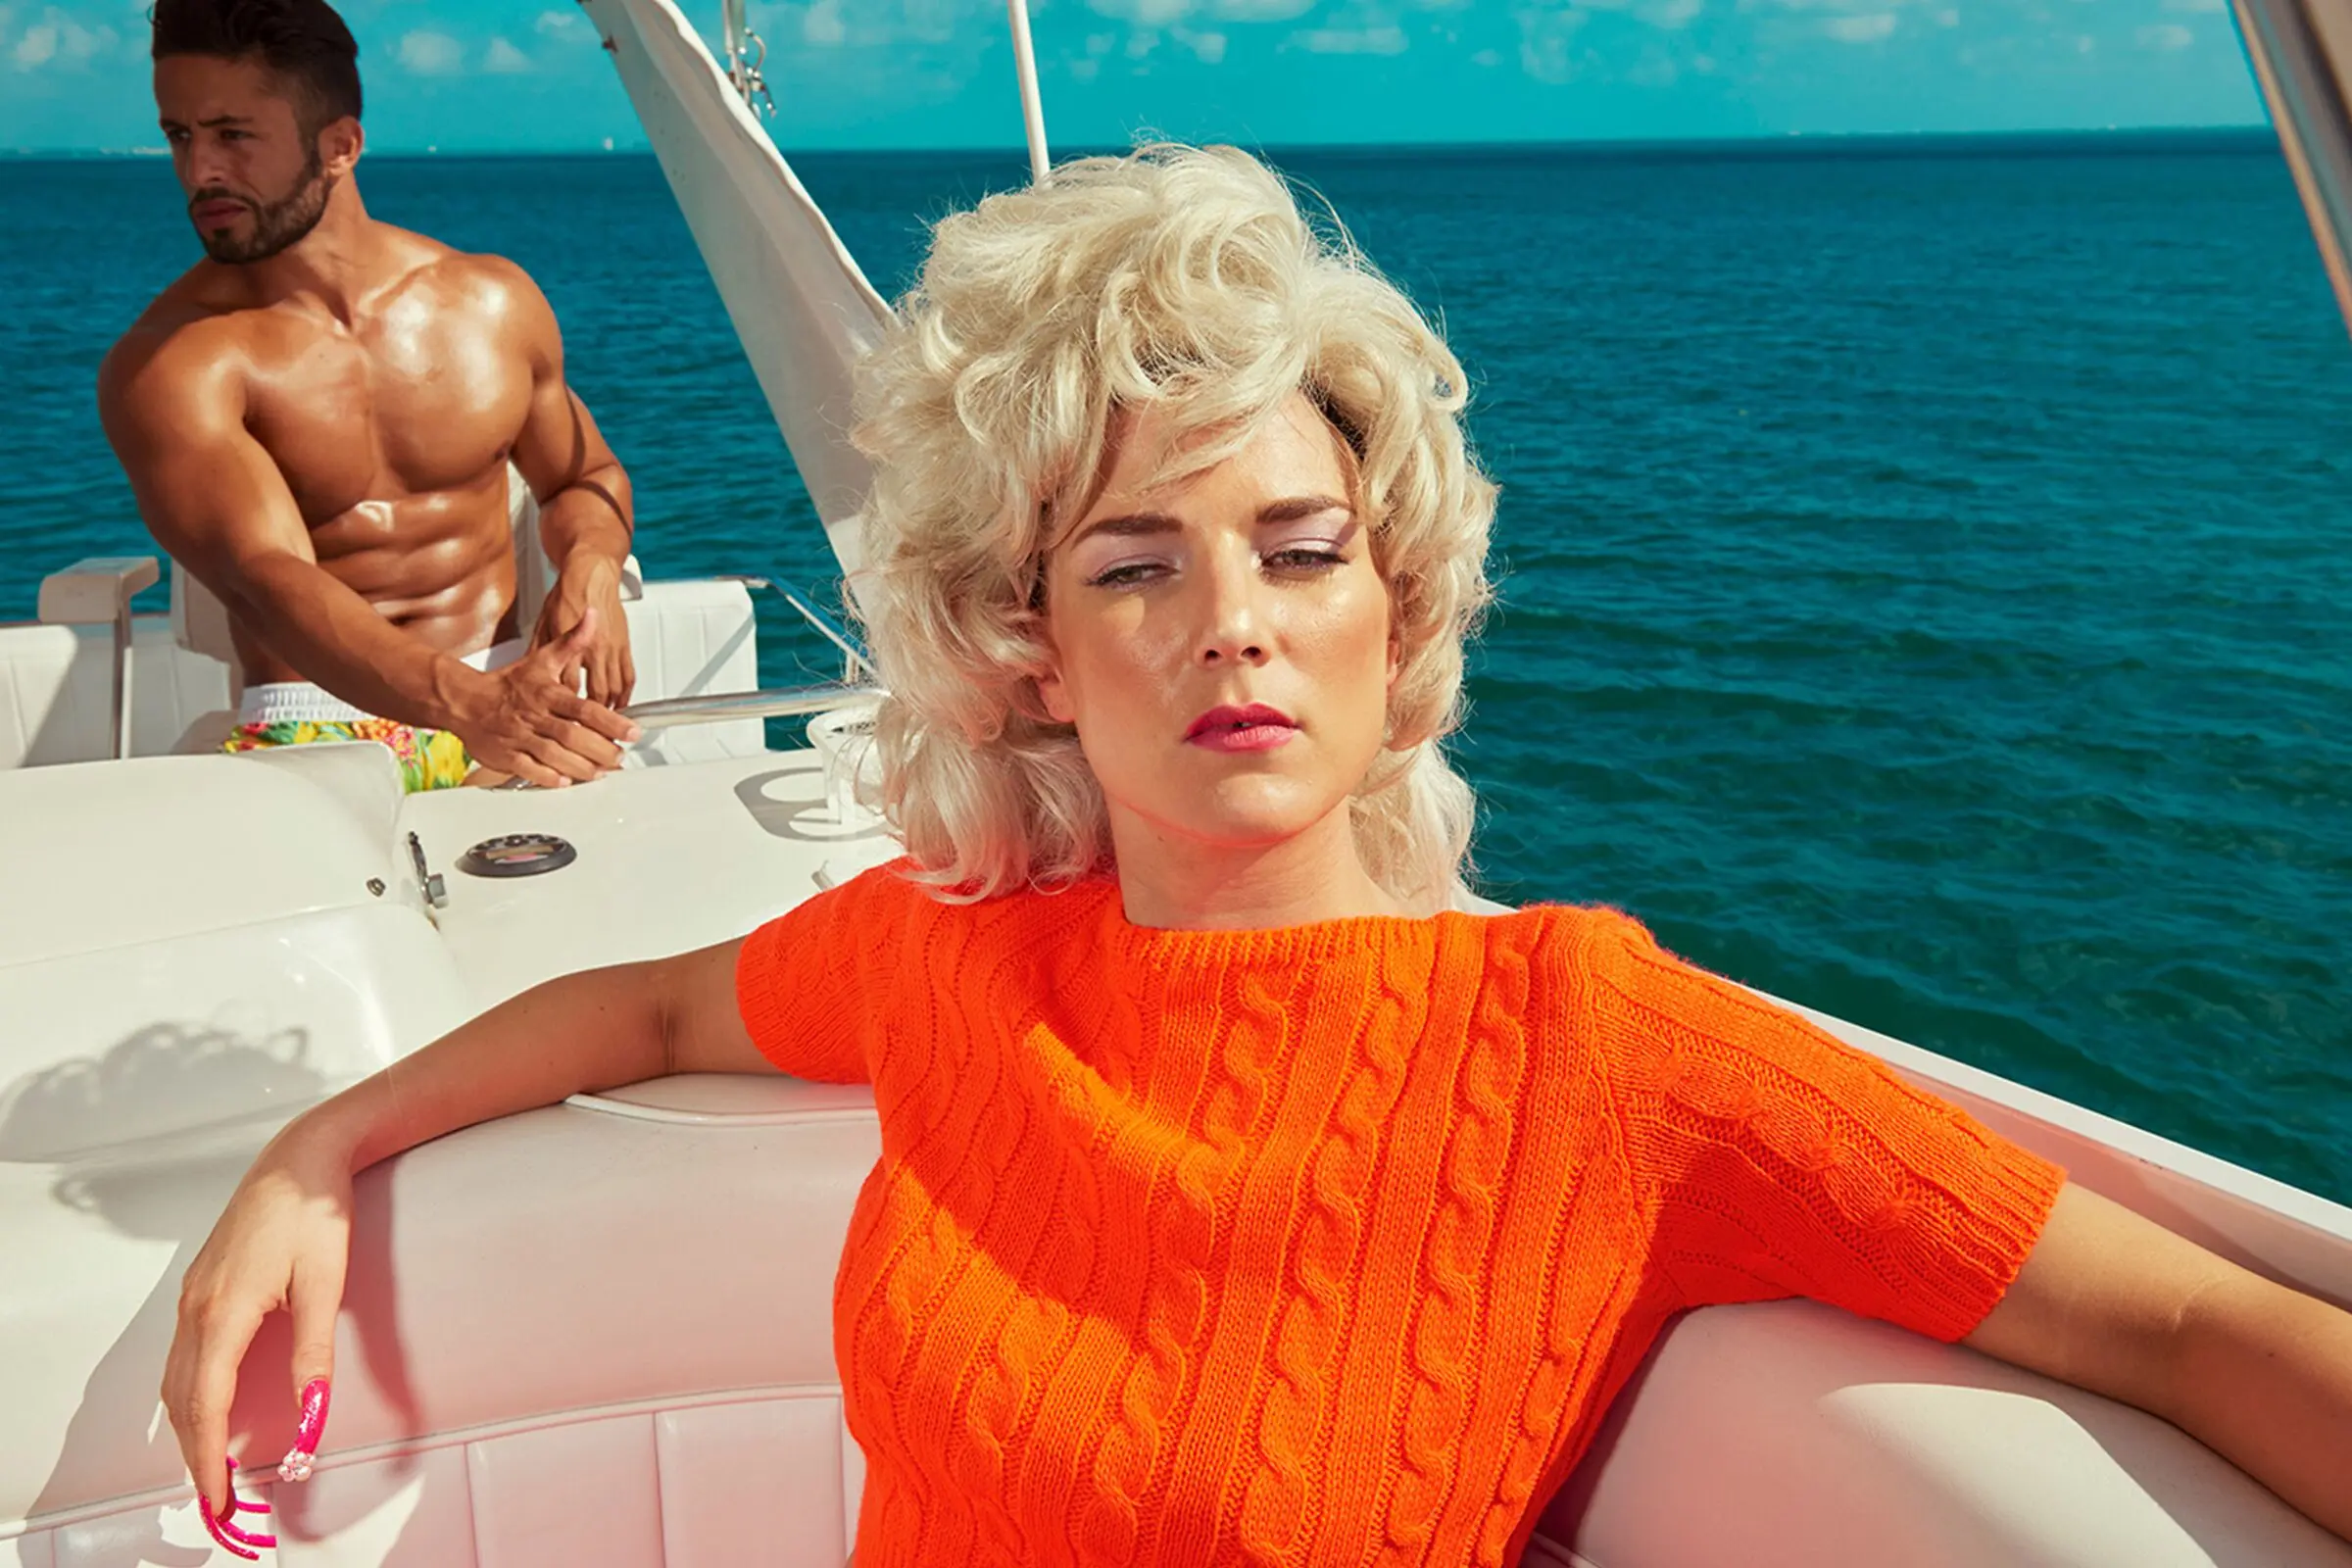 Kourtney Roy self portrait wearing bright orange shirt on a boat with tanned muscular driver in the background.